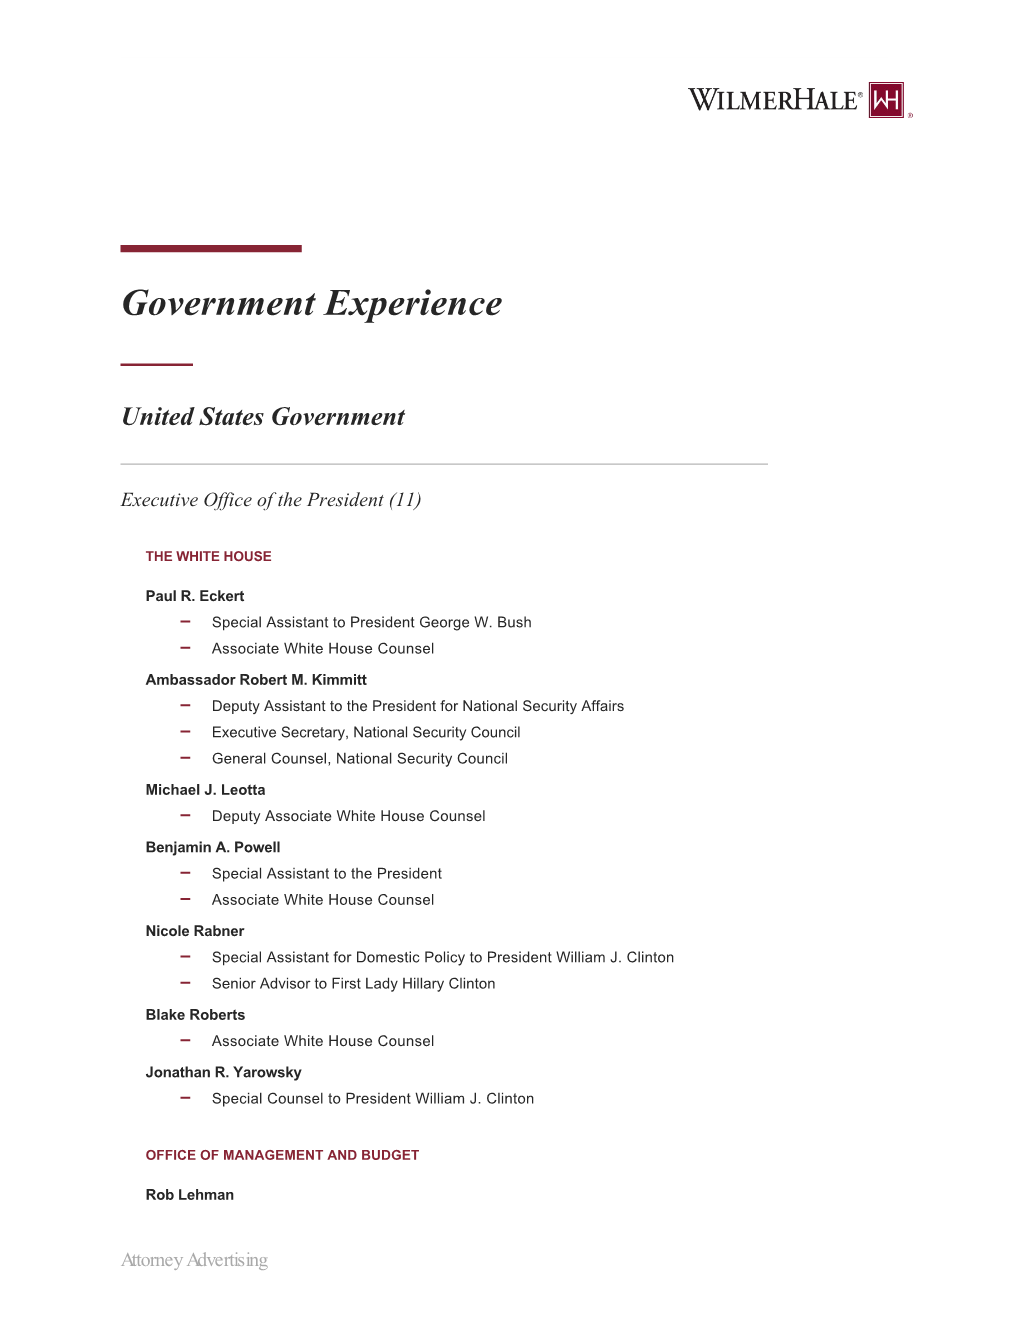 Government Experience | Wilmerhale